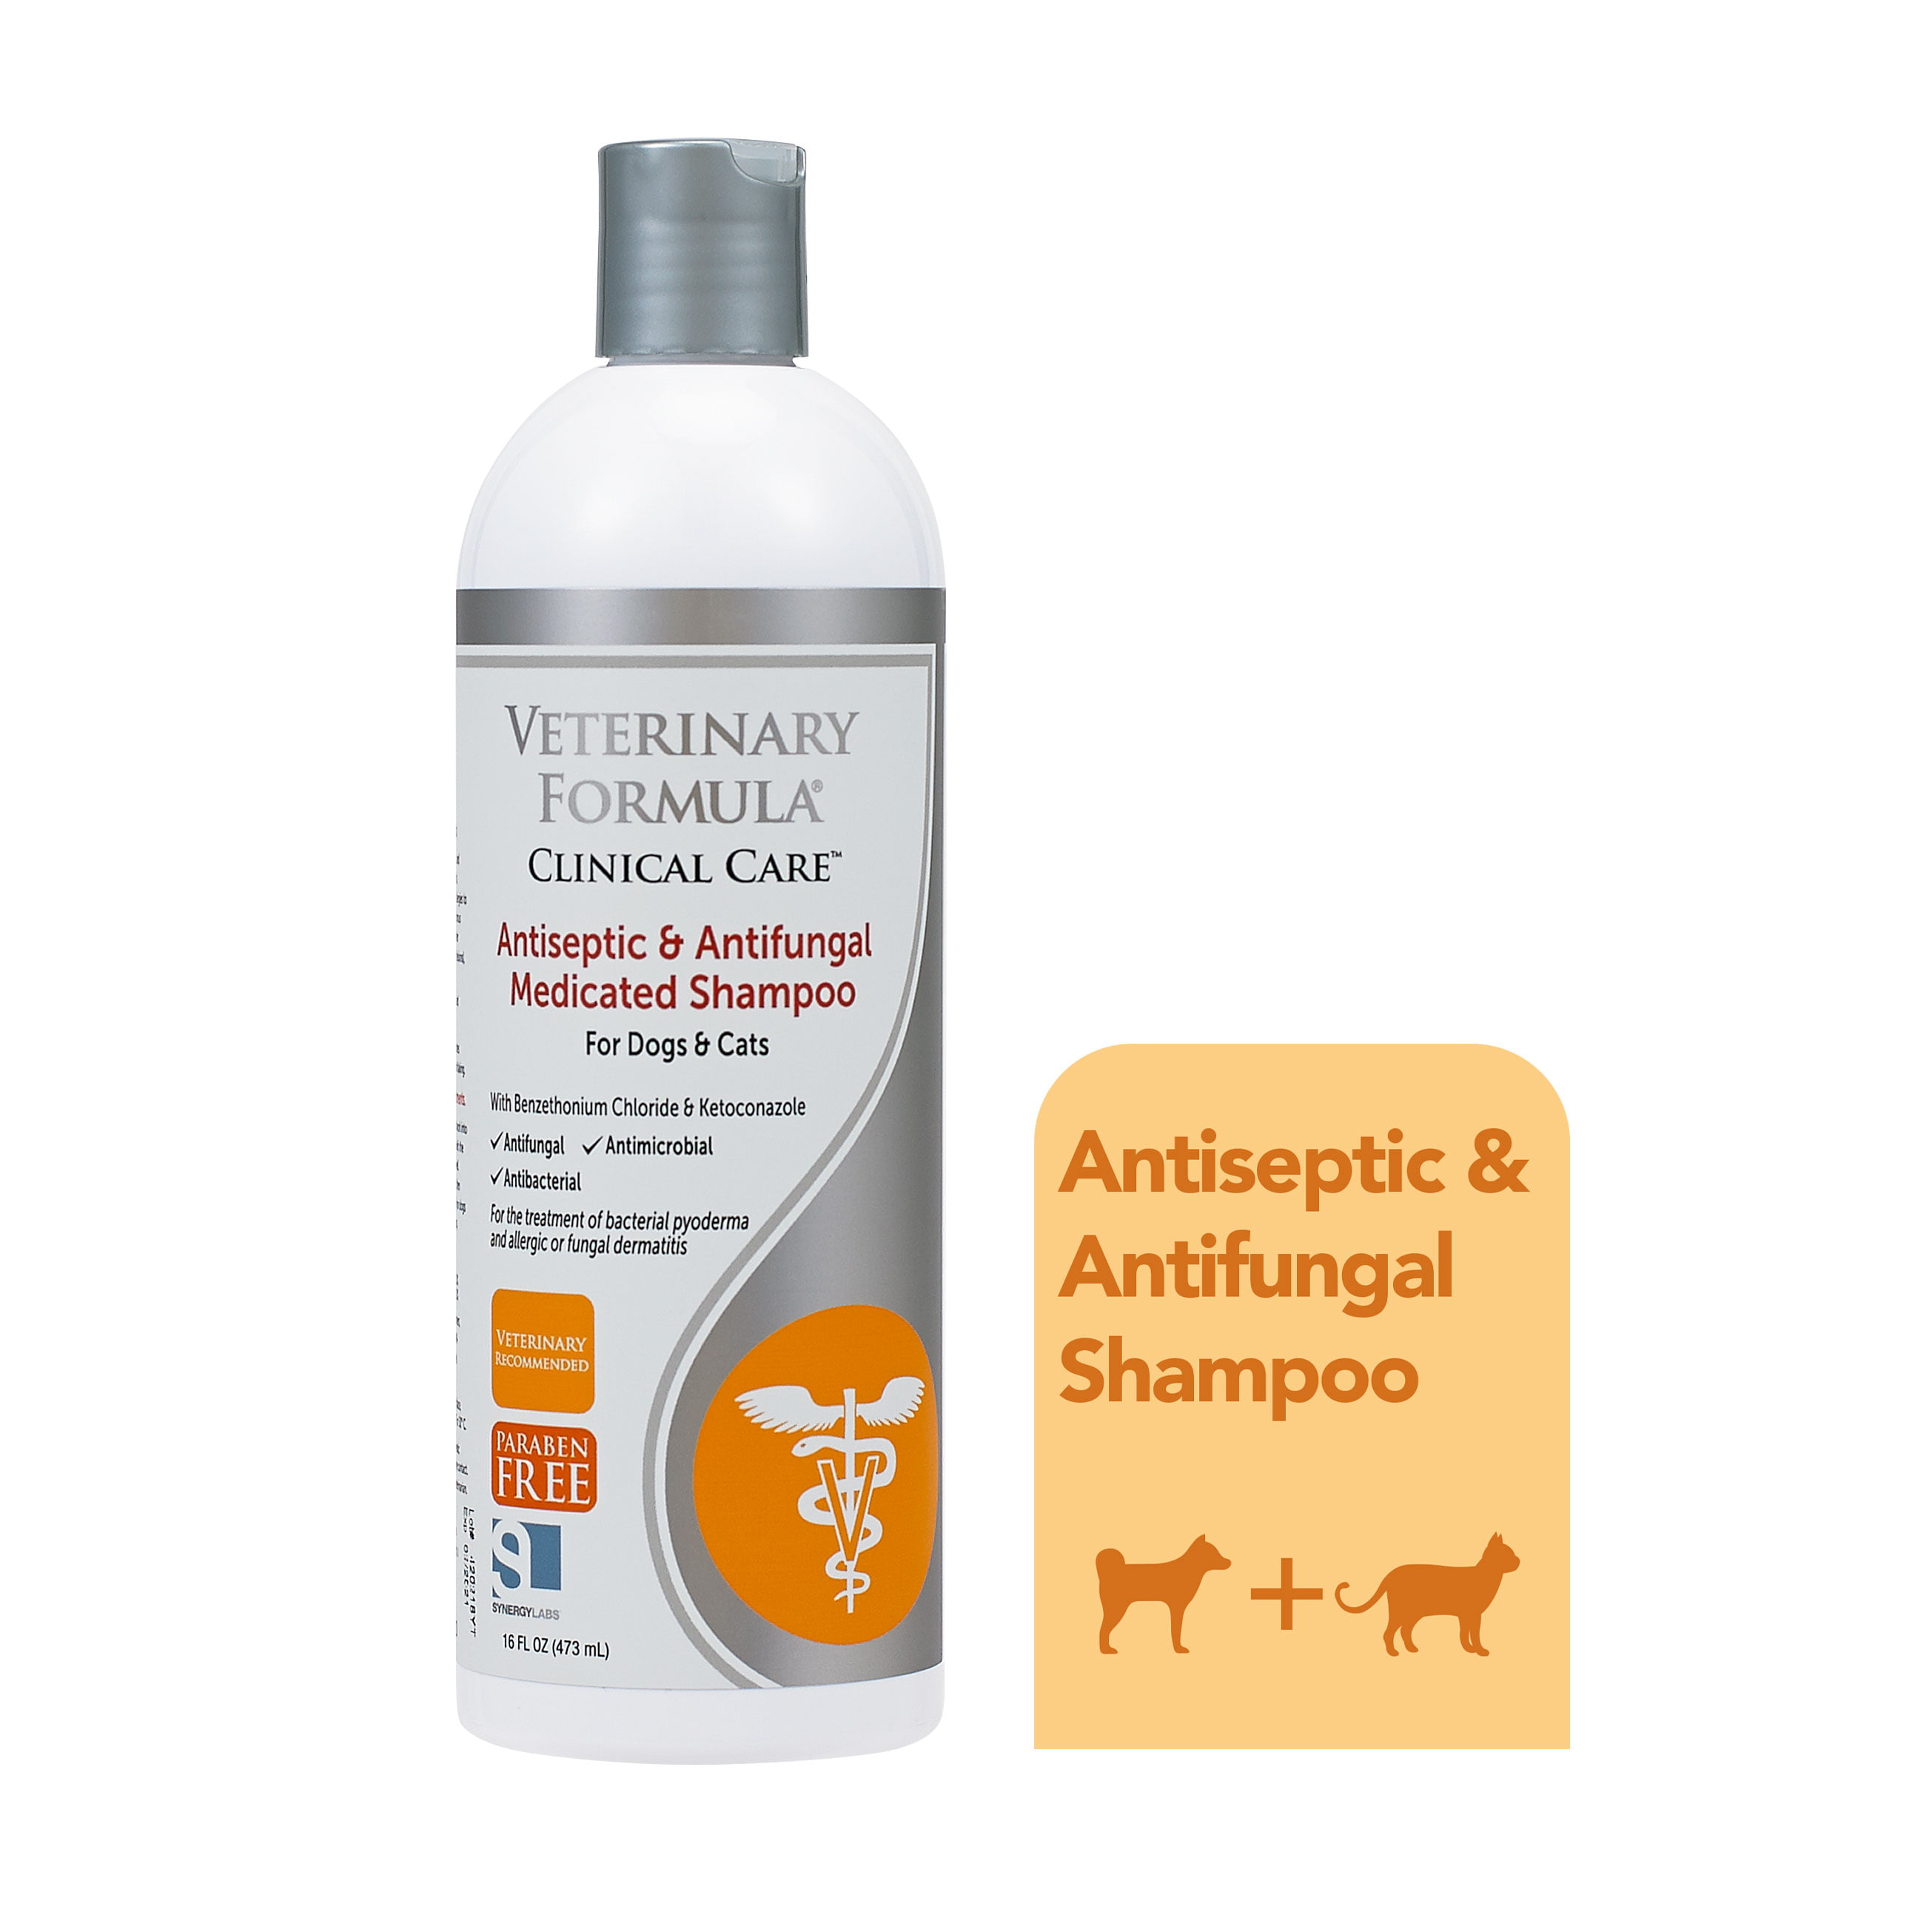 tea tree shampoo for dogs with yeast infection